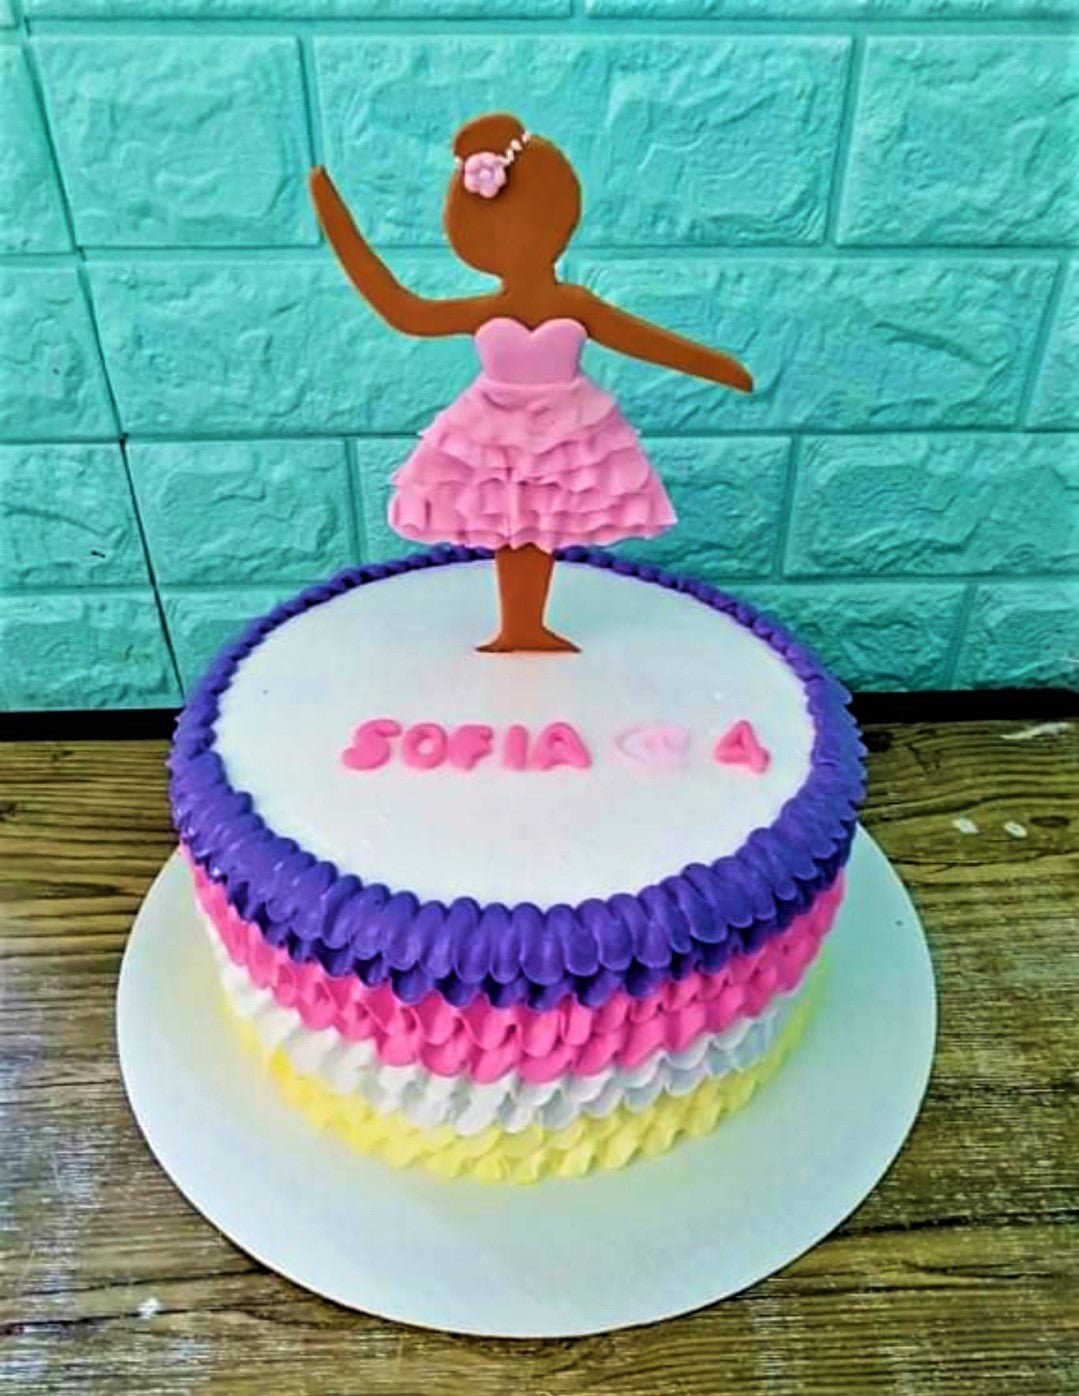 15 Classy Ballerina Cake Ideas - Recipes, Tutorials, Tips, and Supplies -  Party with Unicorns